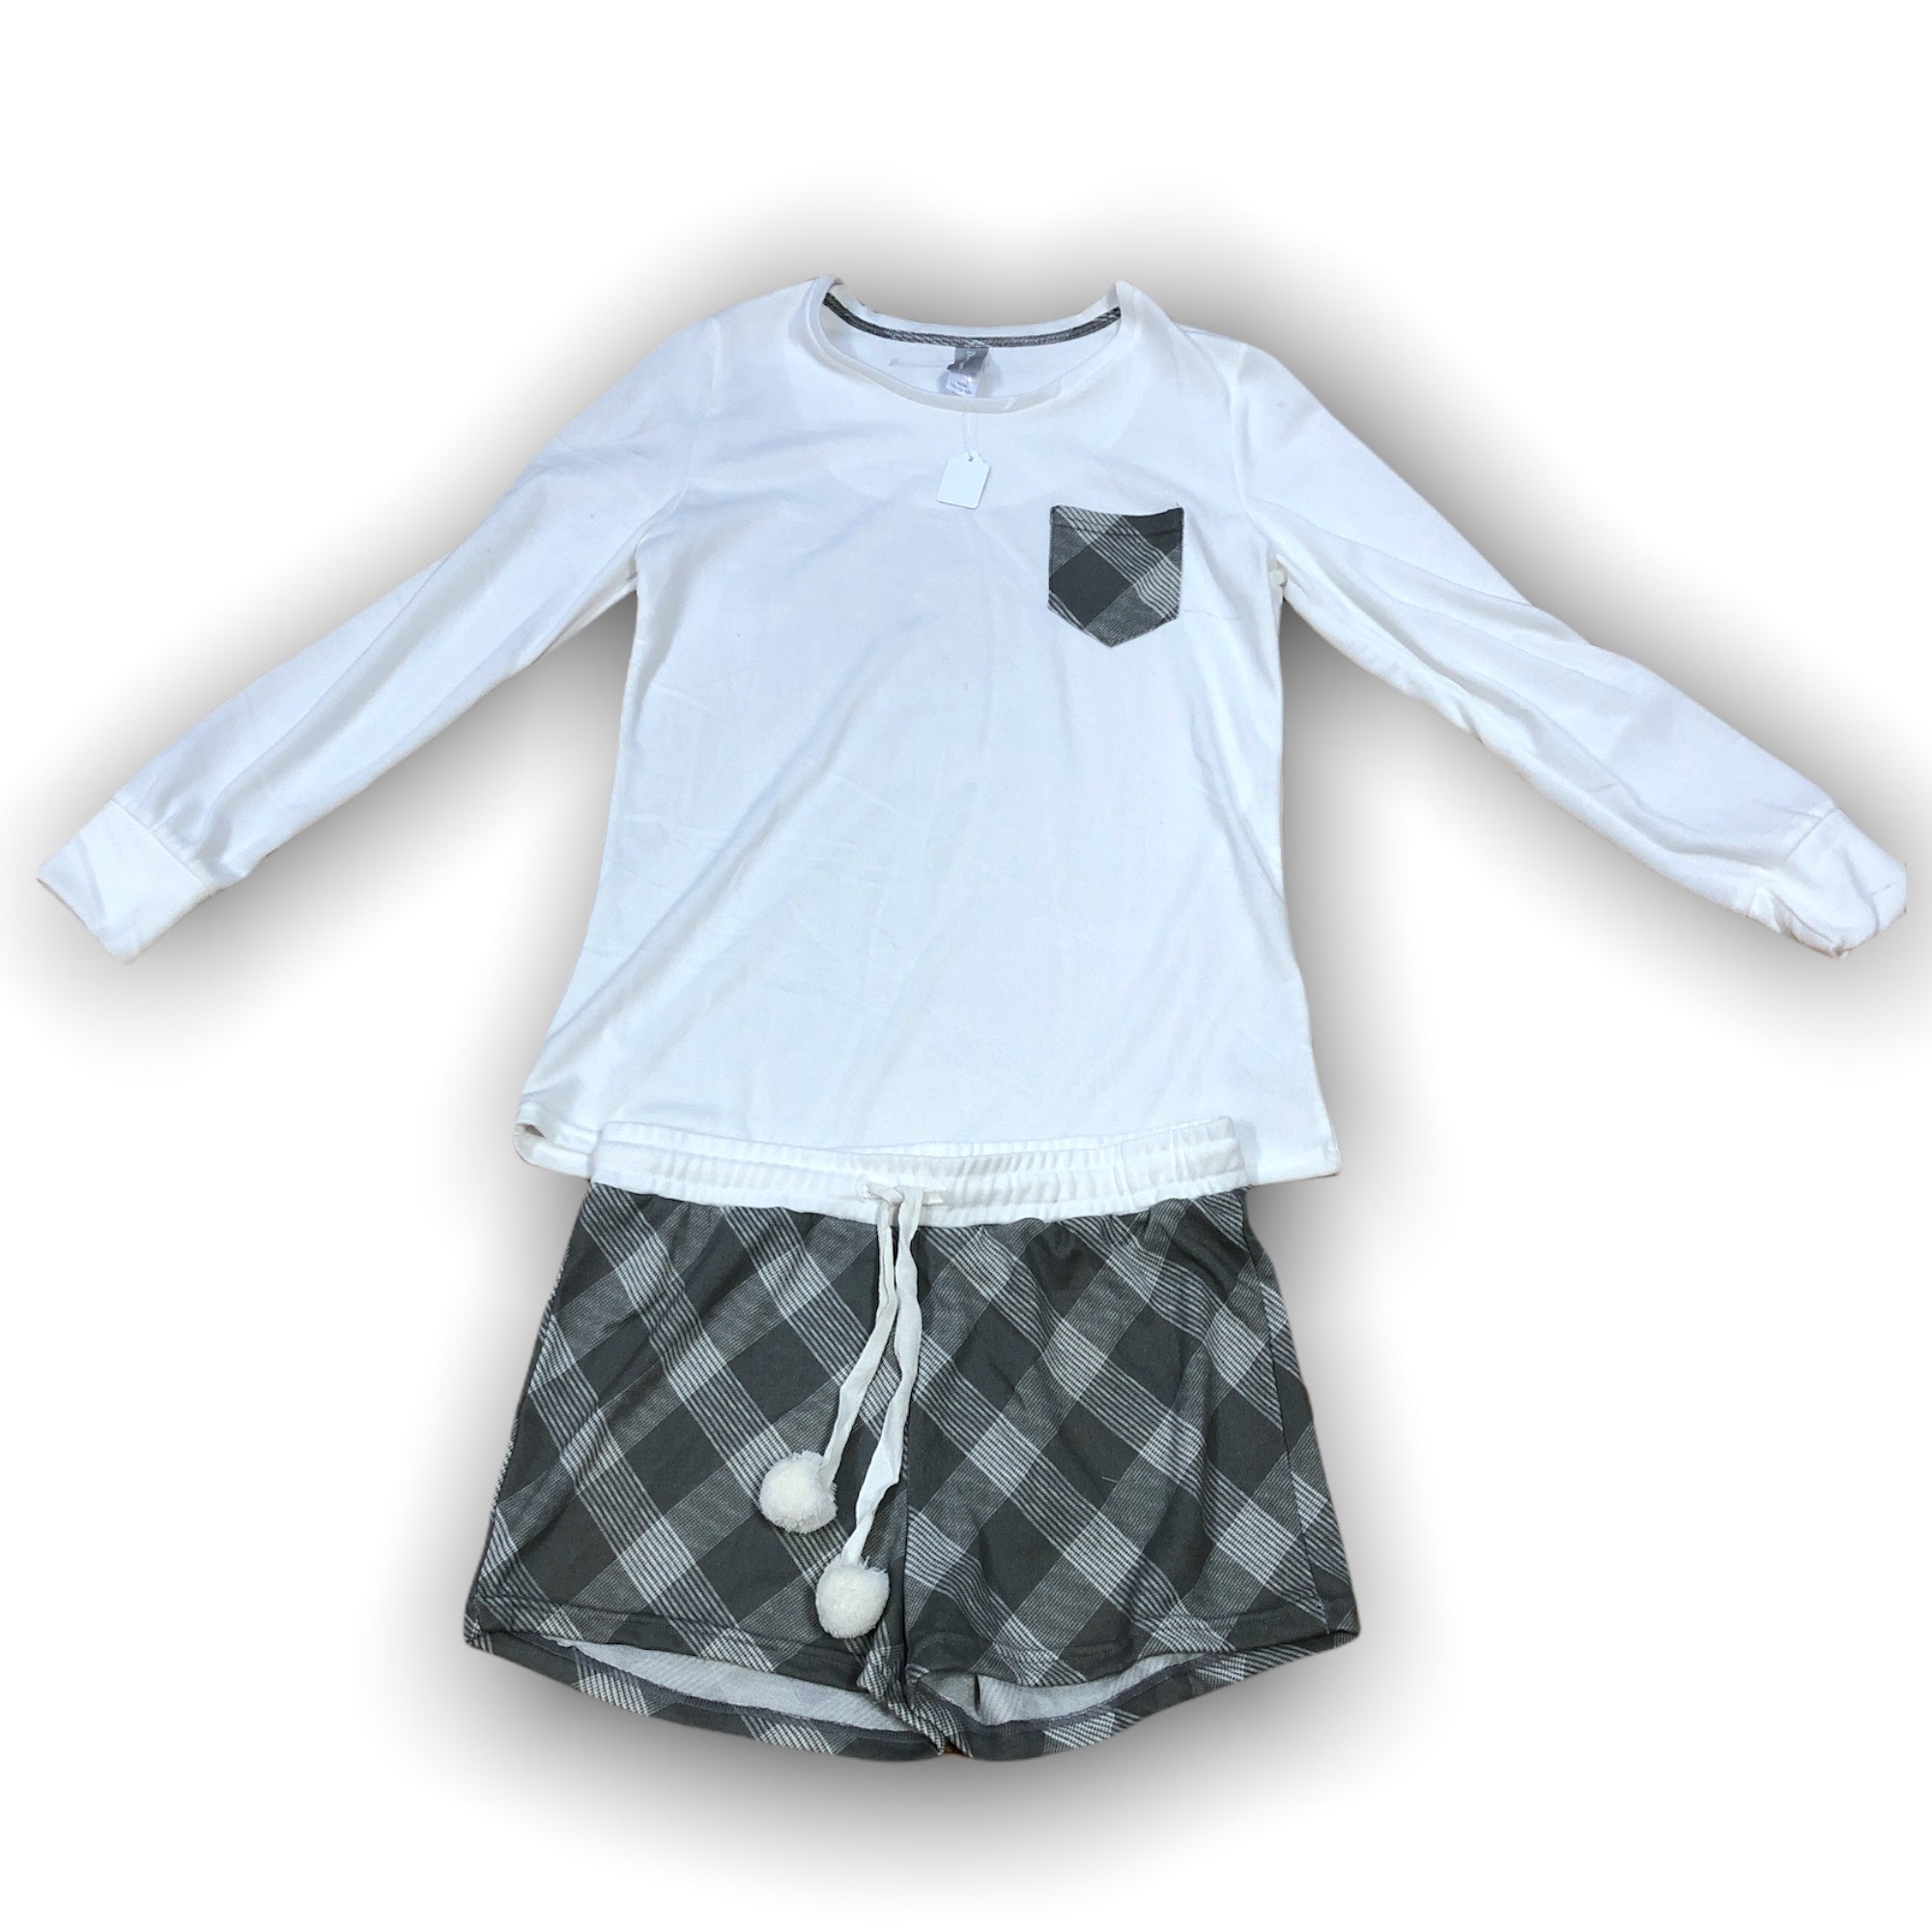 Women's Two Piece Pajama Set with Long Sleeve Top & Shorts